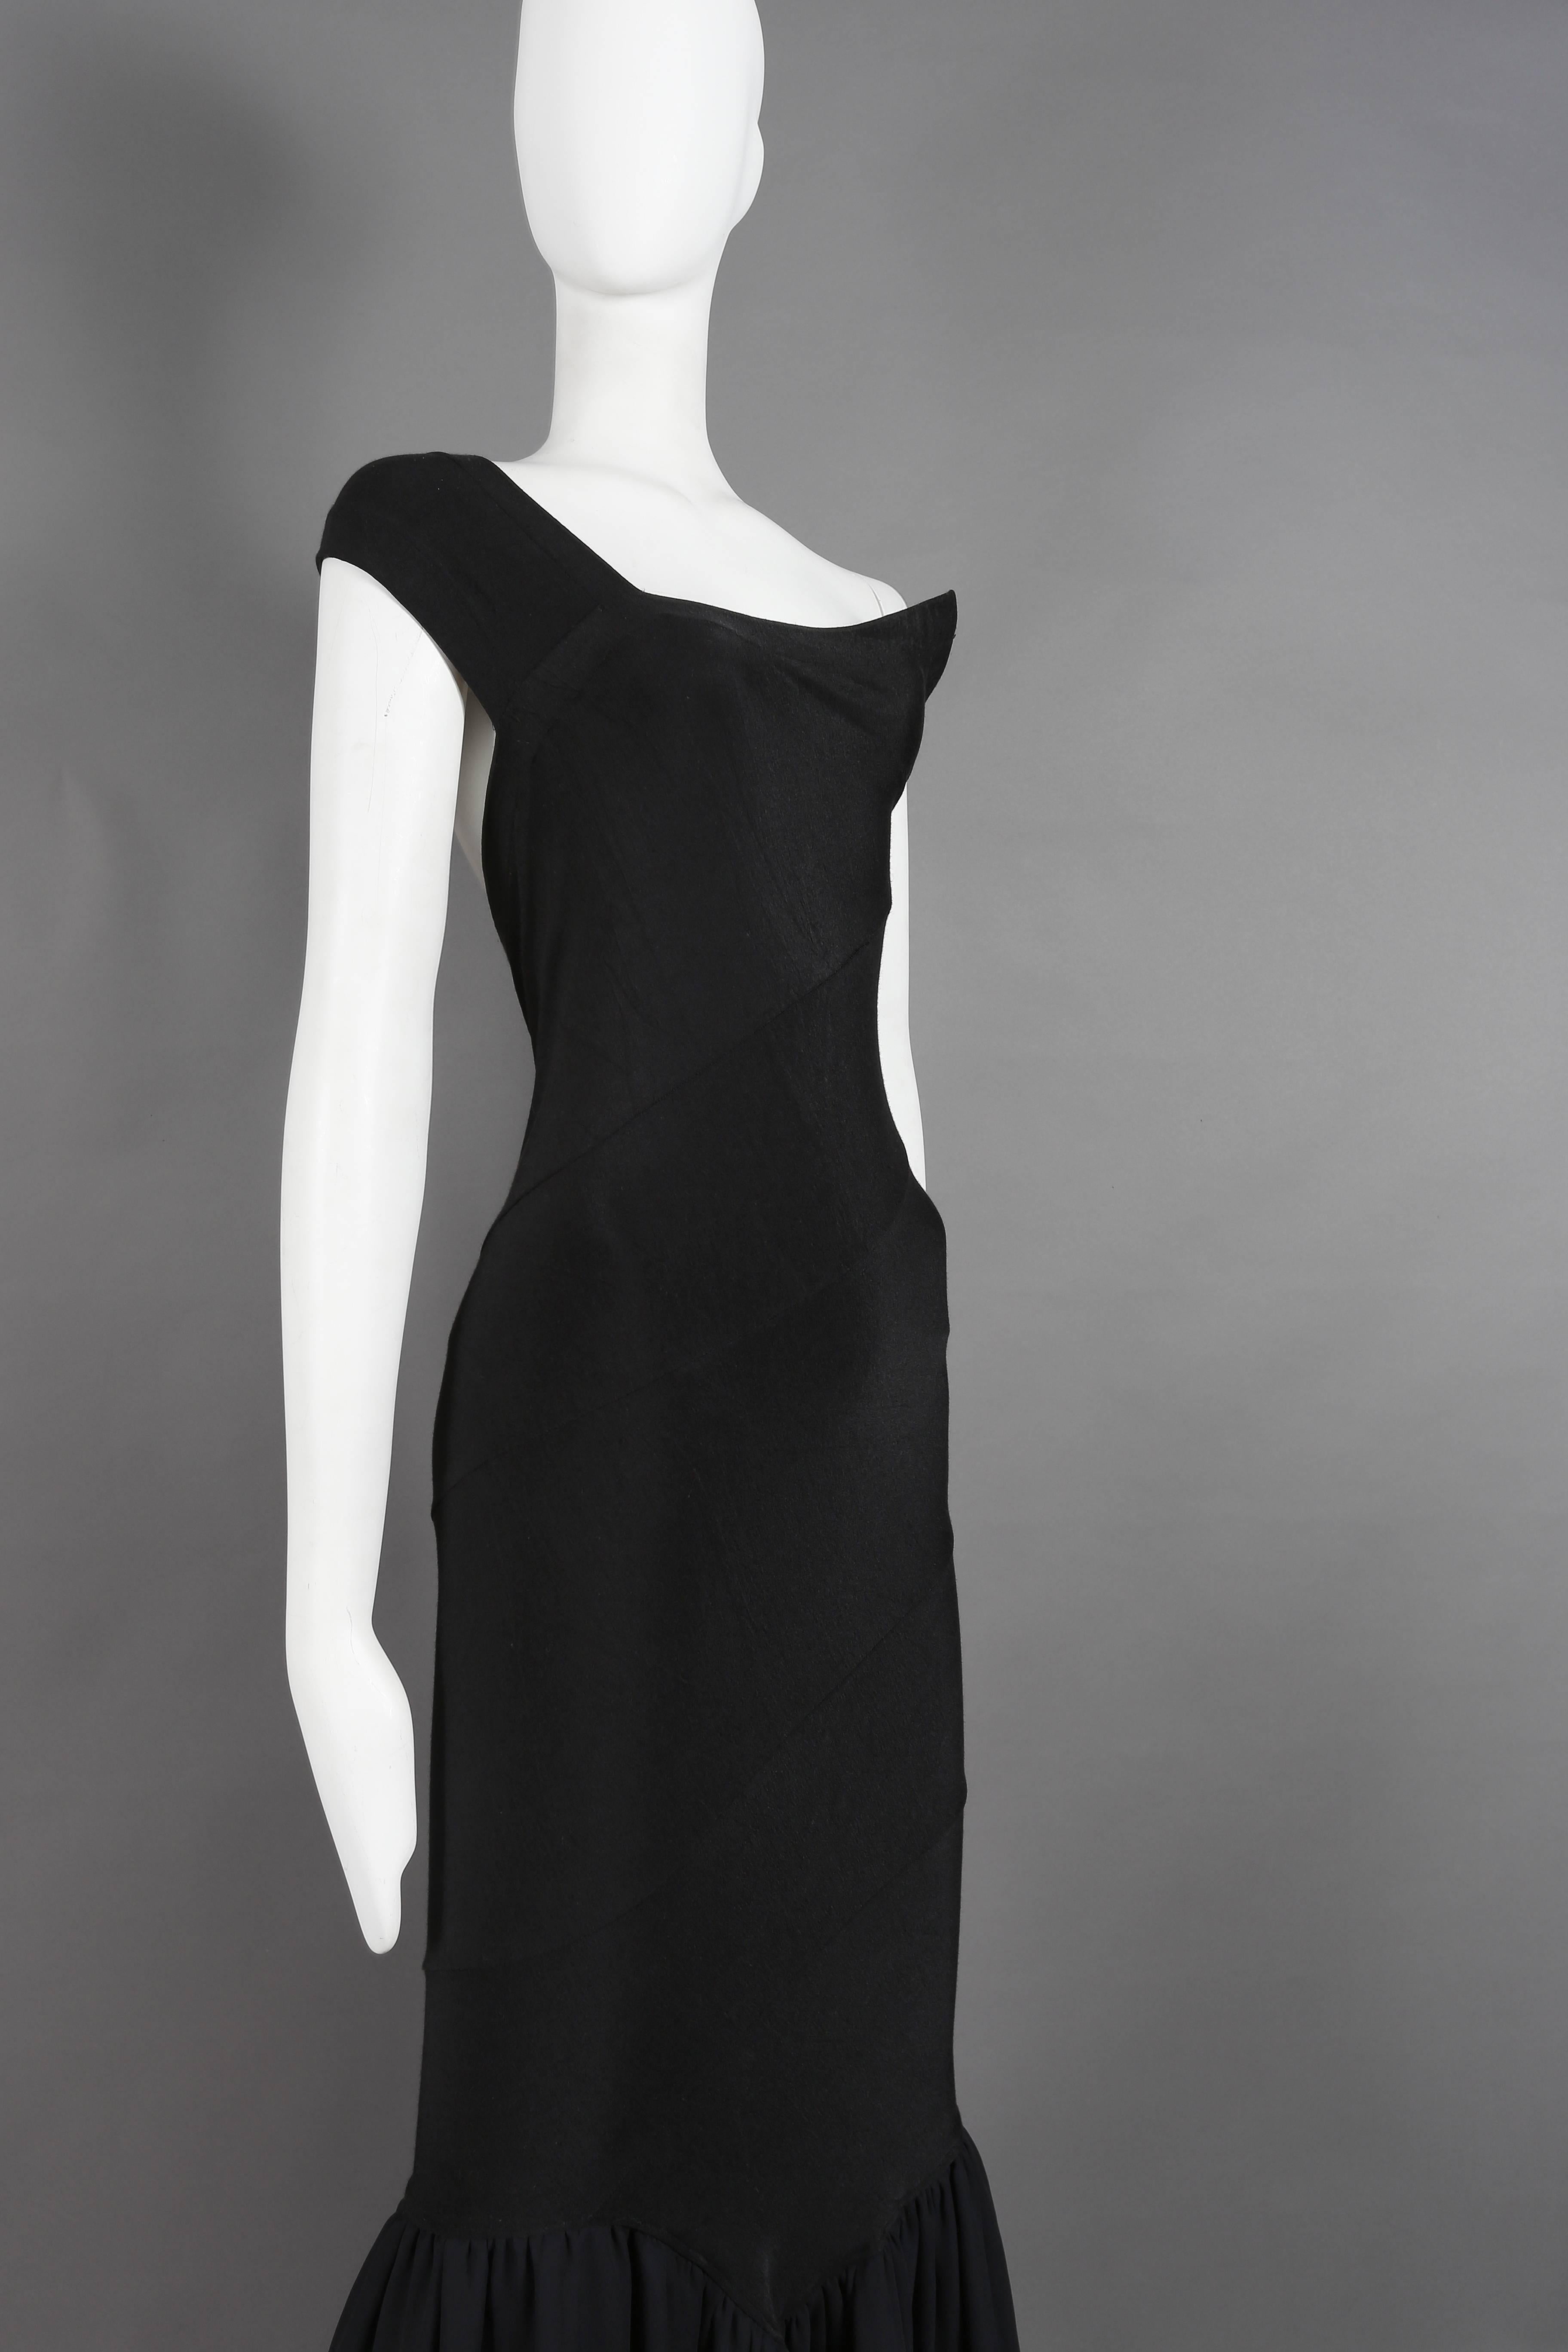 Comme des Garcons bias cut knitted gown with fish tale skirt, circa 1986 1